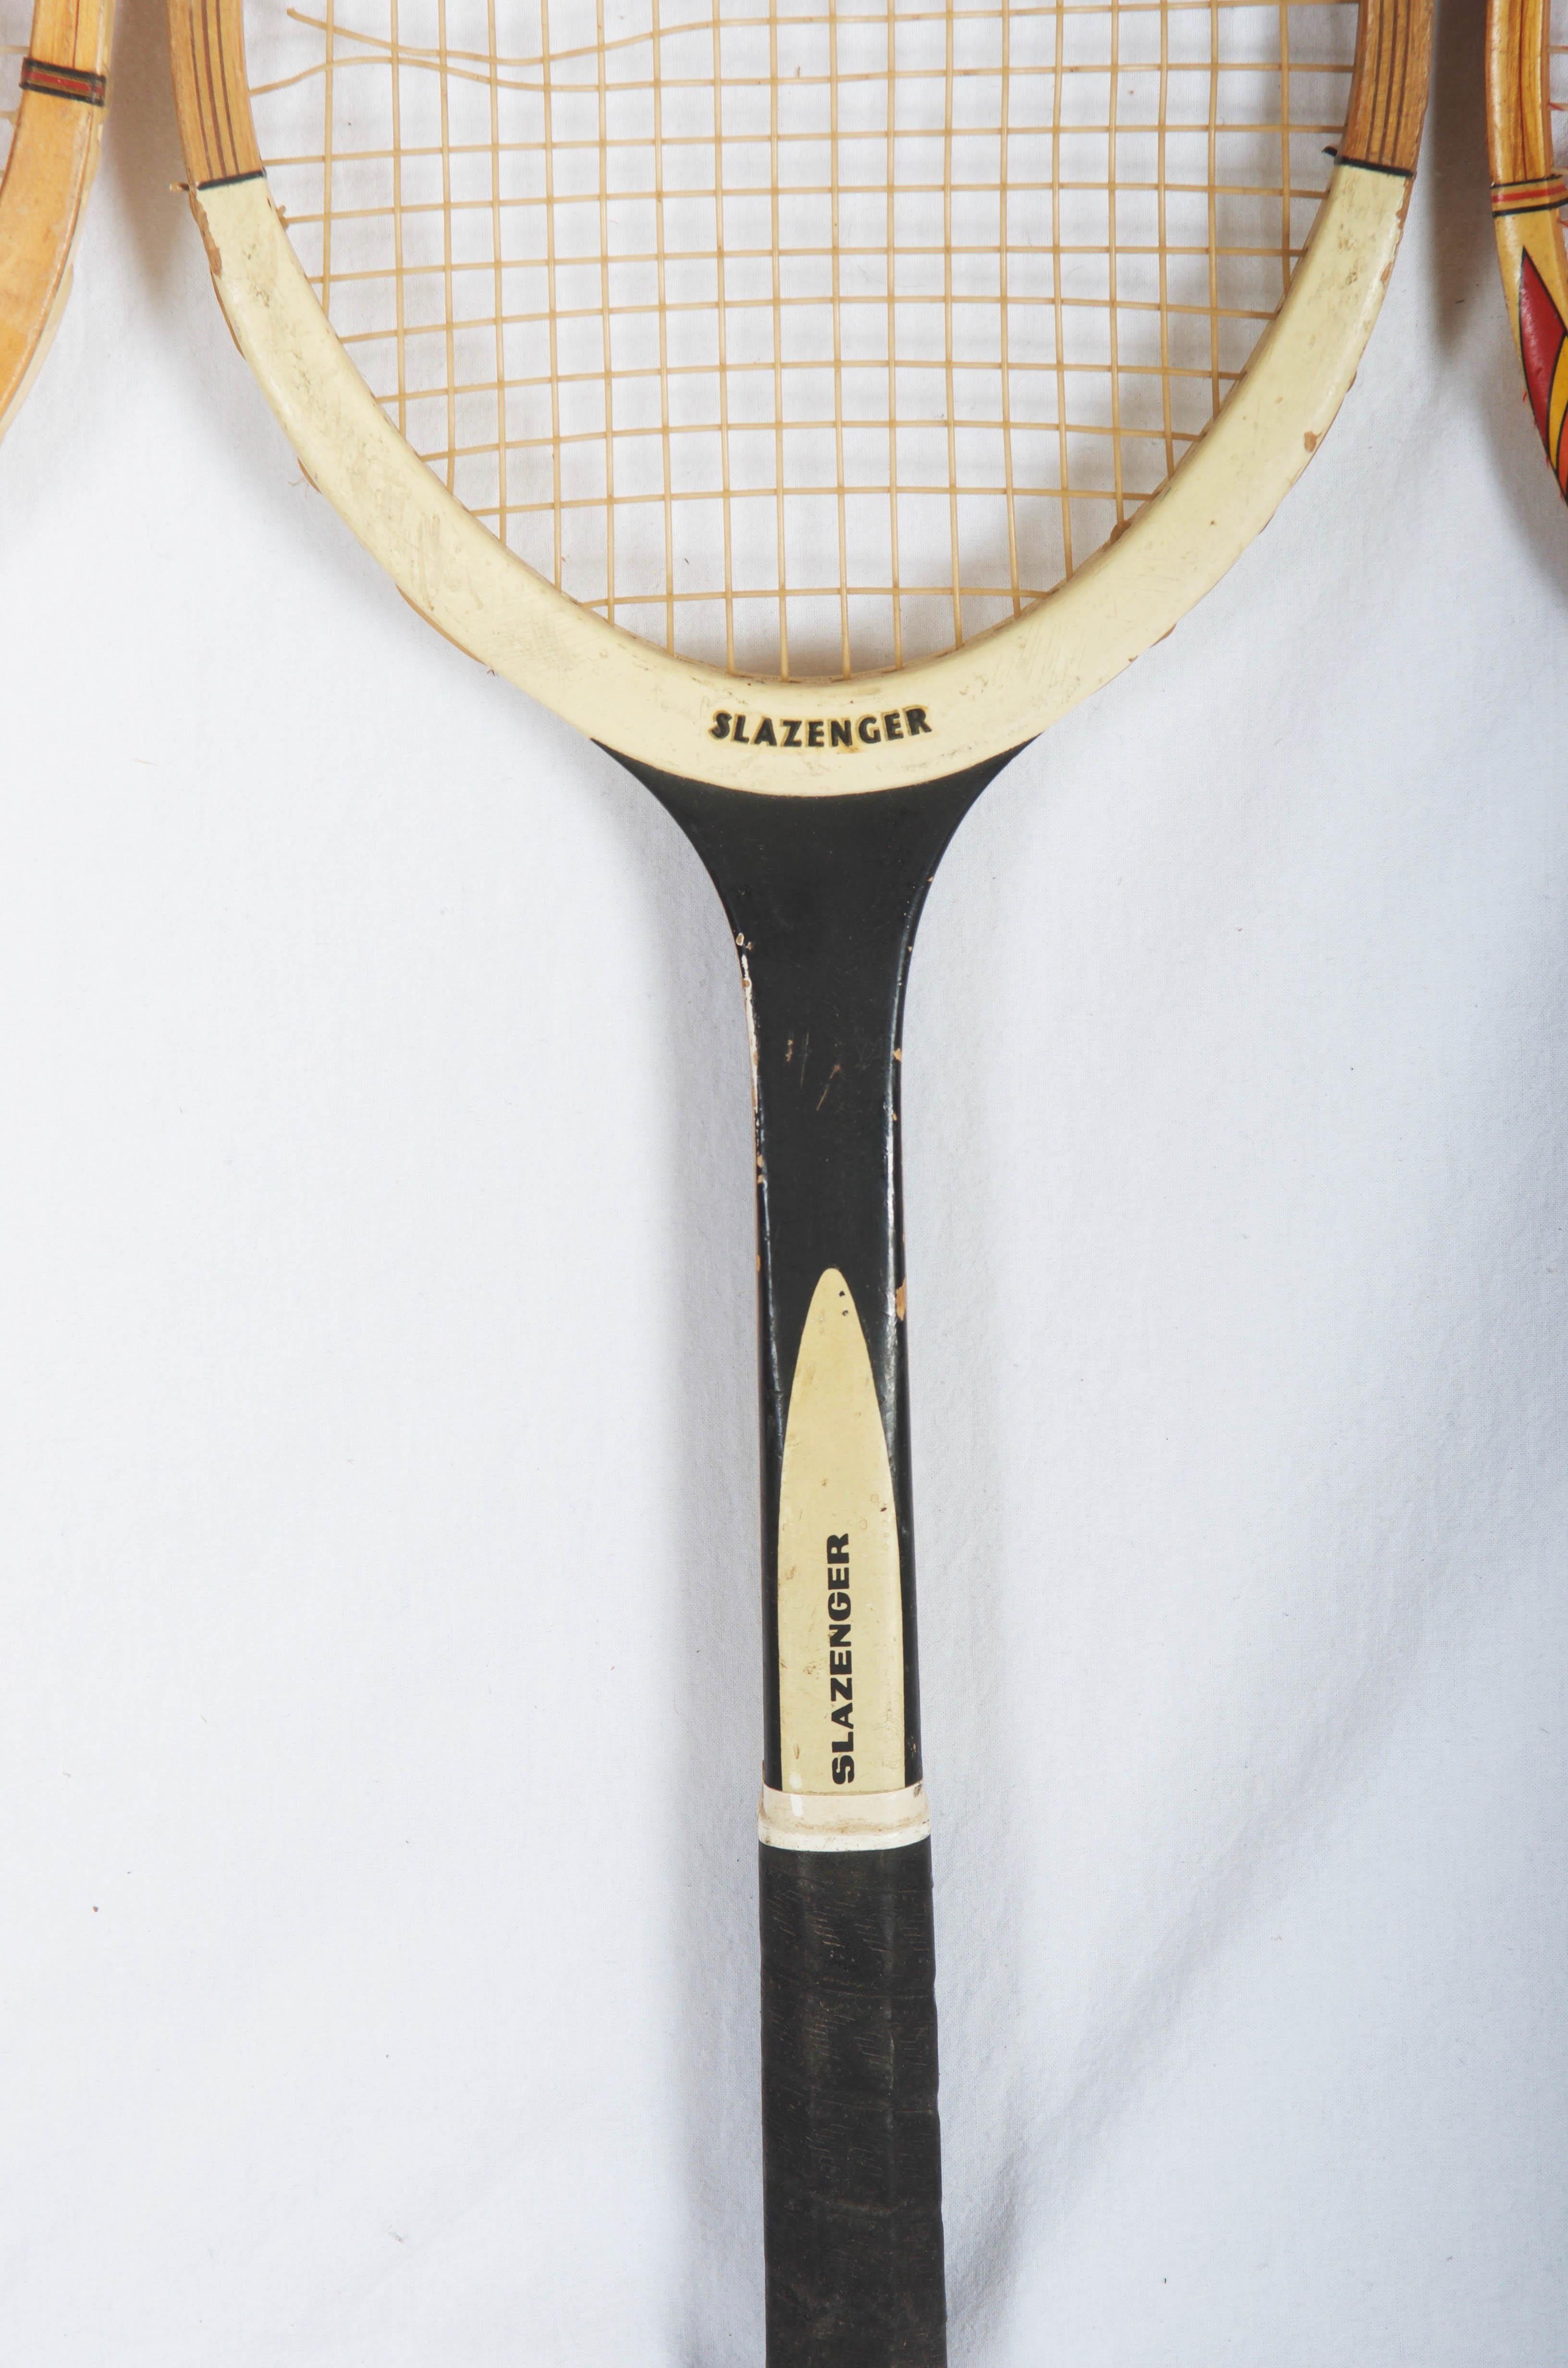 old tennis rackets for sale